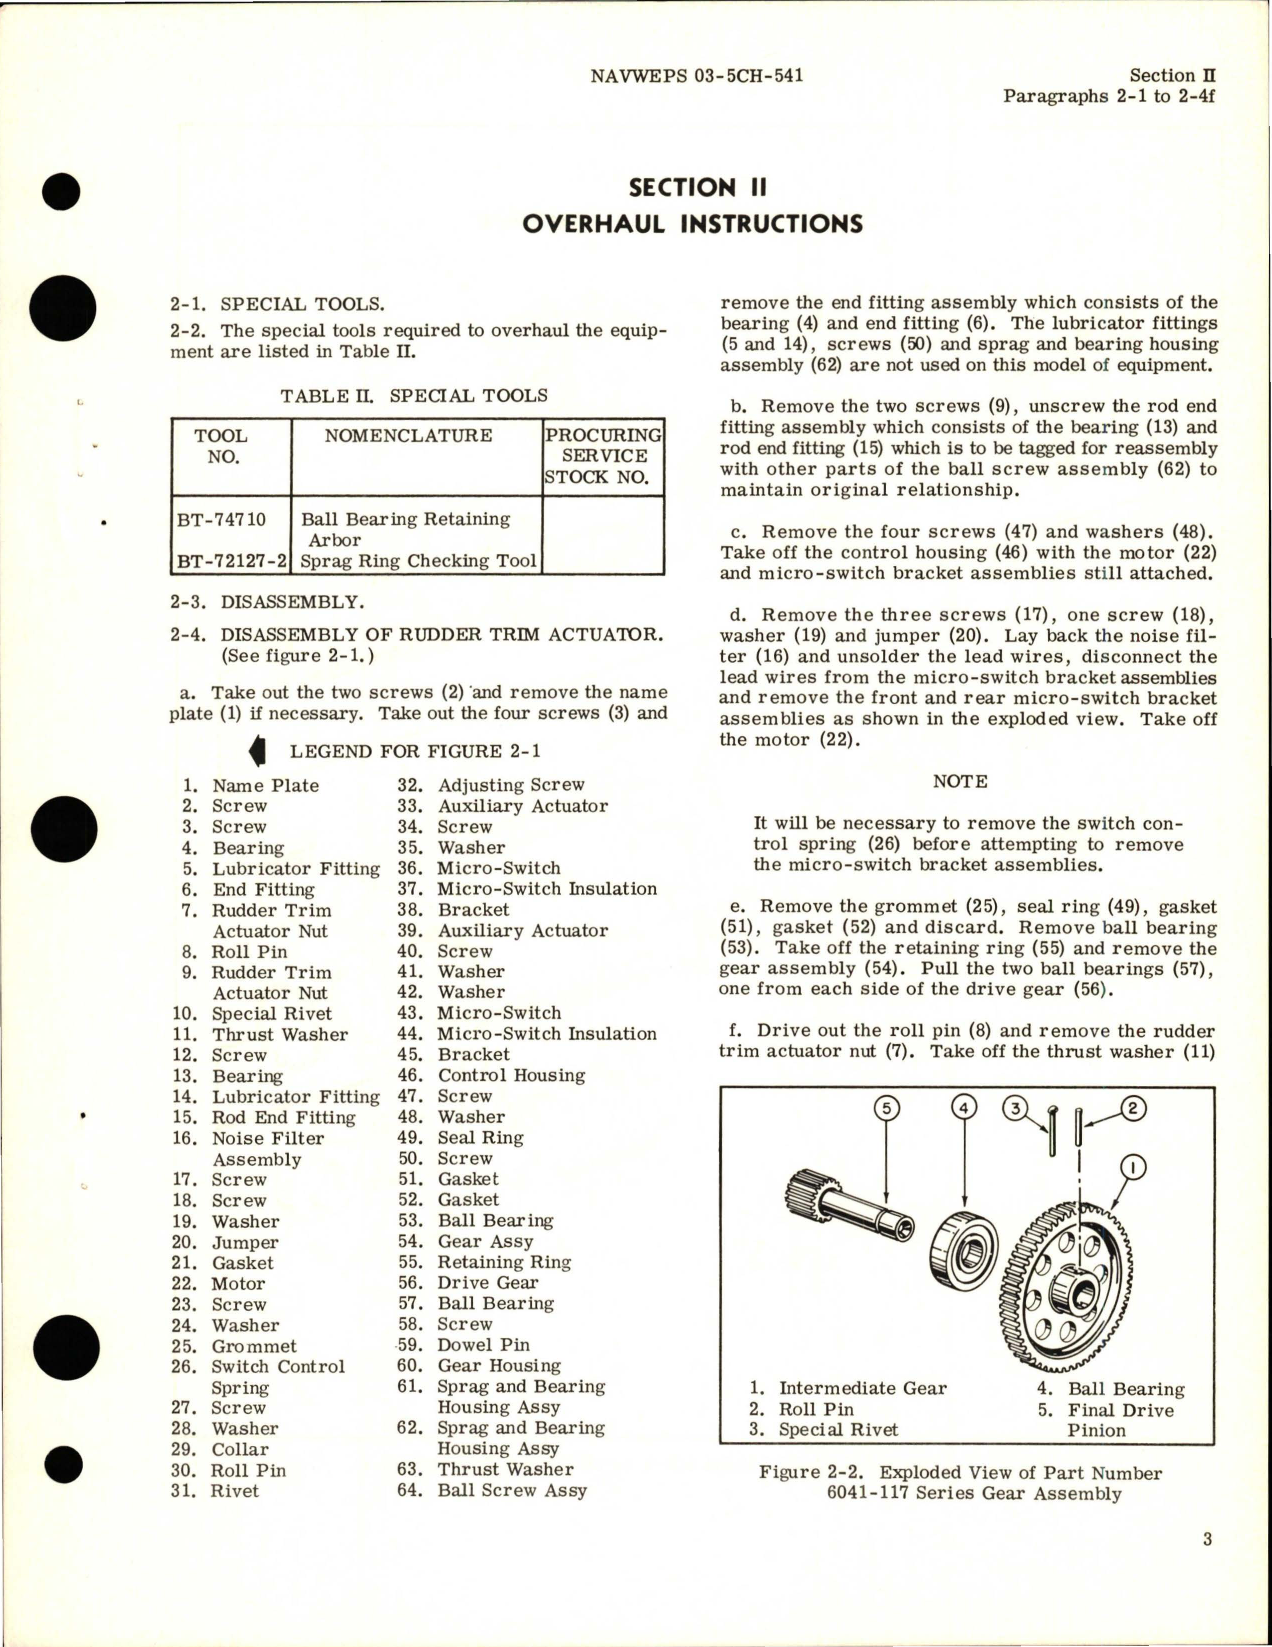 Sample page 7 from AirCorps Library document: Overhaul Instructions for Rudder Trim Actuator - Models 16041A, 16041B, and 16041C 